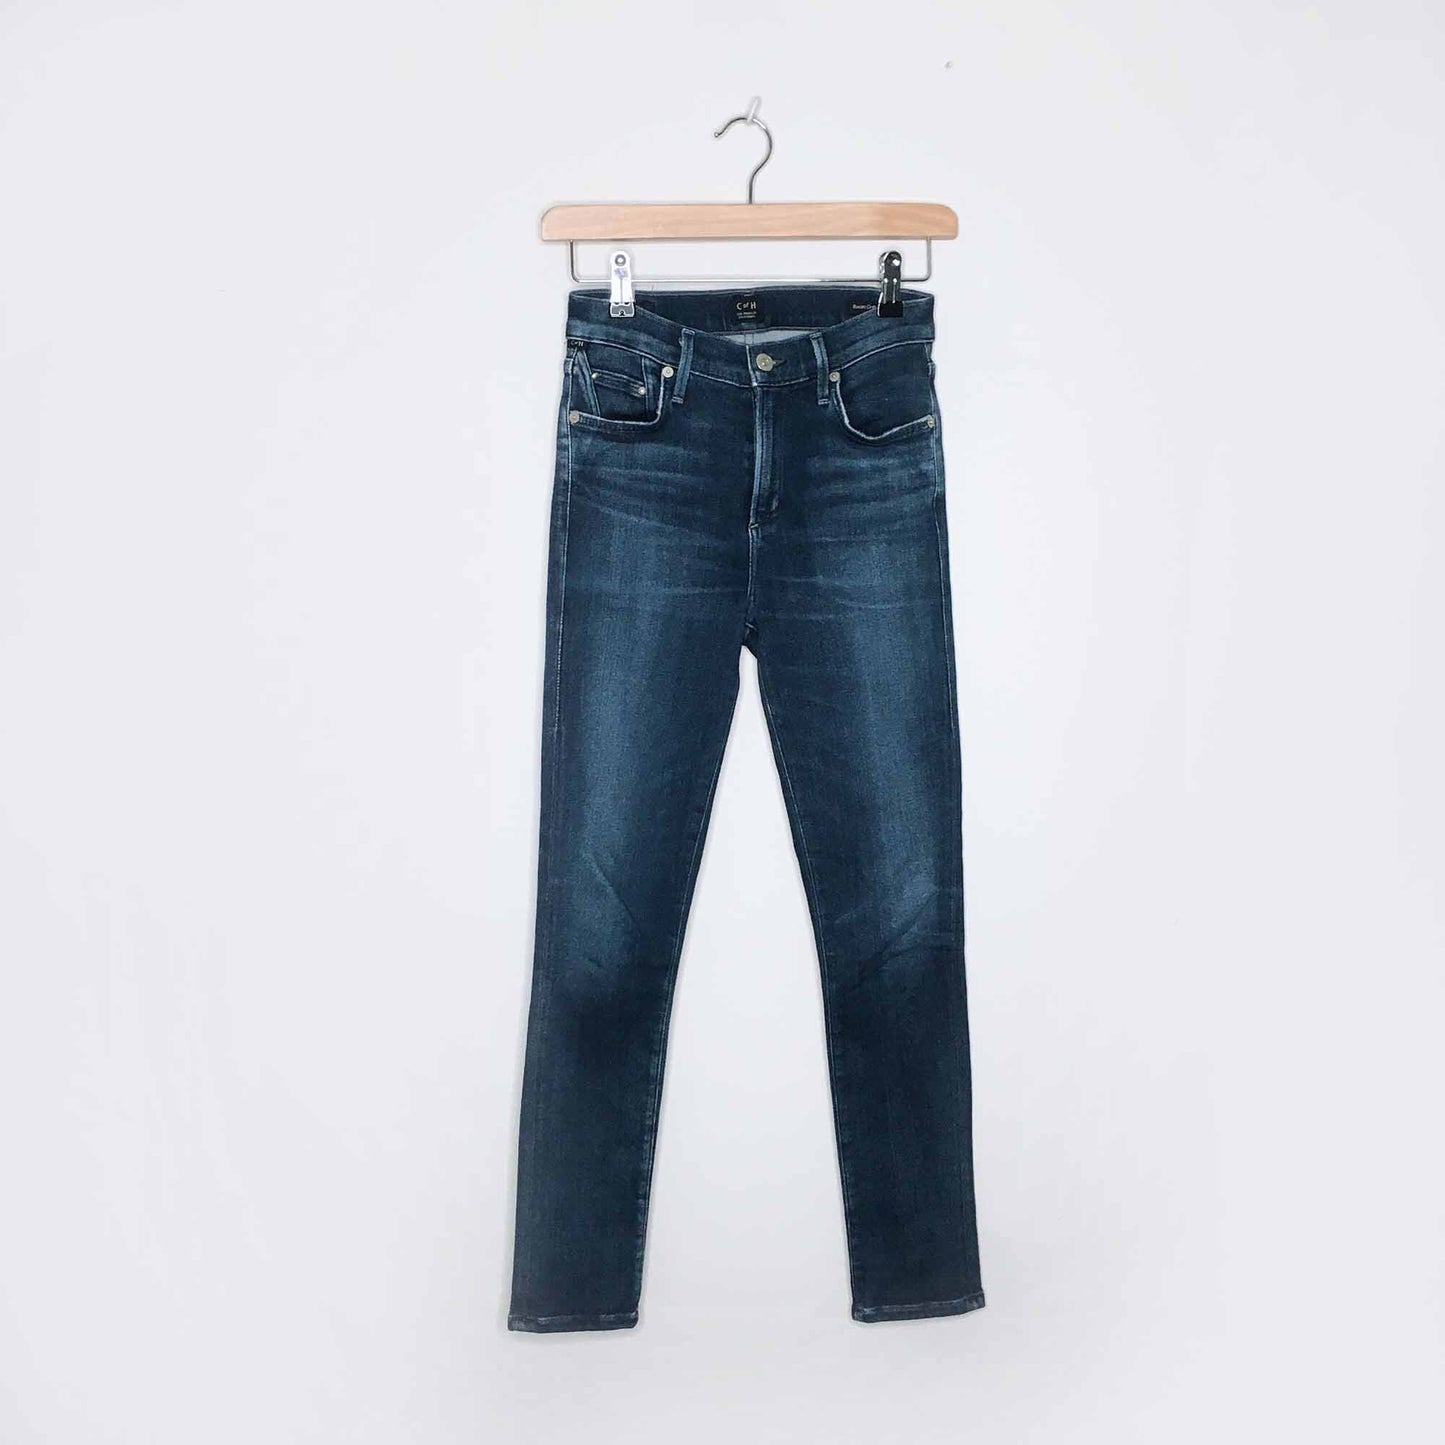 Citizens of Humanity rocket crop high rise skinny - size 25